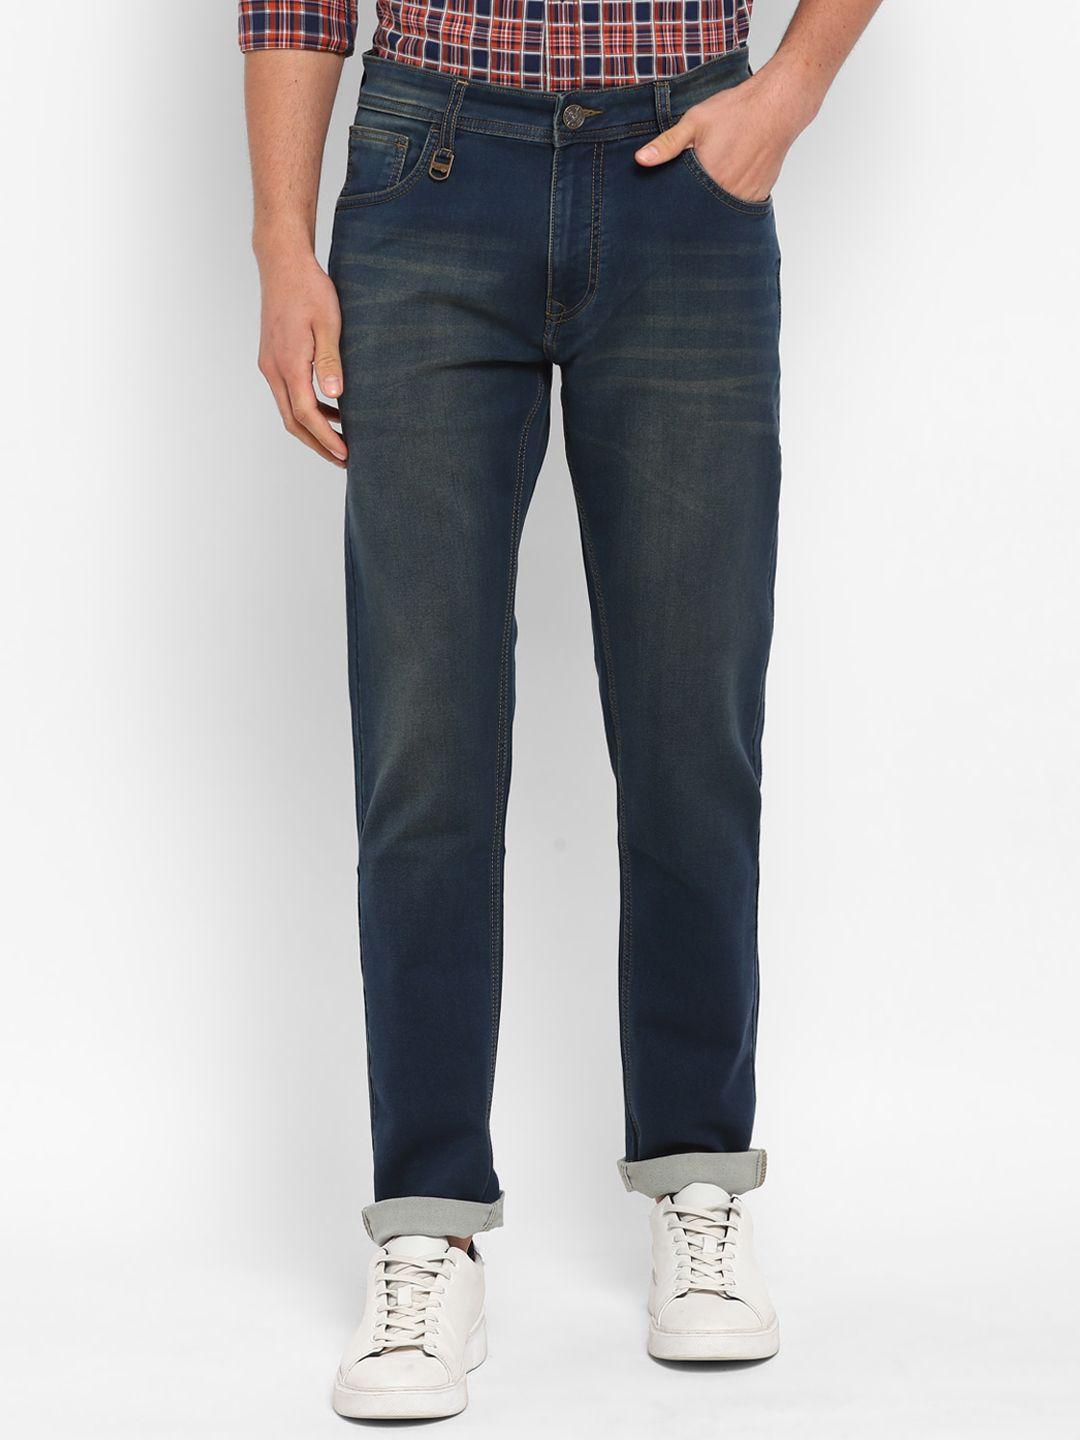 red chief men blue light fade jeans